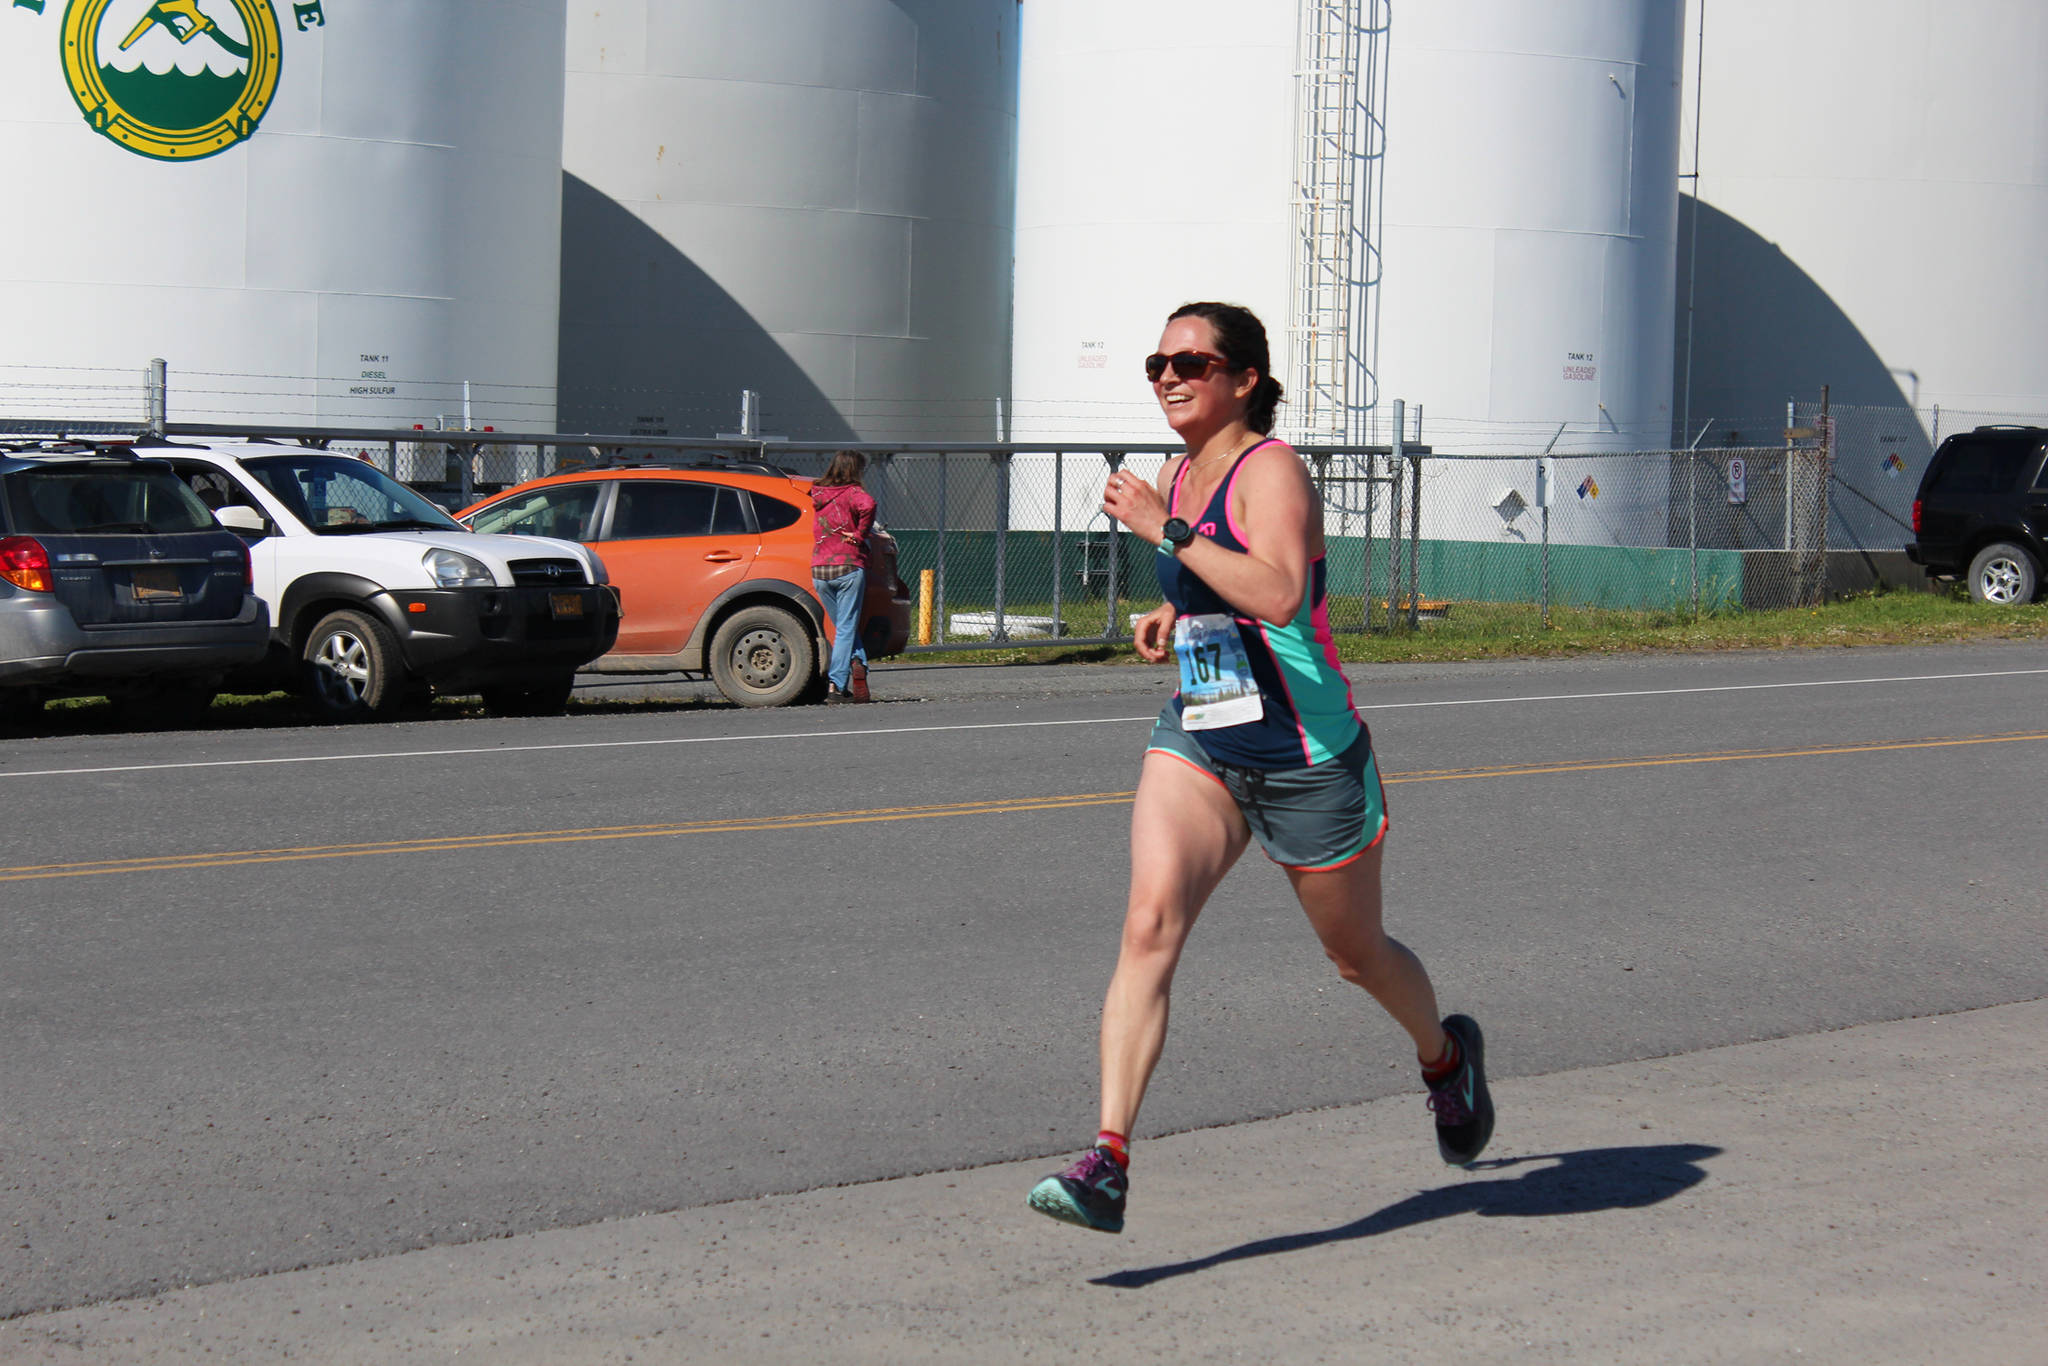 Homer’s Alayne Tetor runs the final stretch to the finish line of the Homer Spit Run on Saturday, June 30, 2018 at Land’s End Resort in Homer, Alaska. Tetor took third place in the Cosmic Hamlet Half Marathon for the women. (Photo by Megan Pacer/Homer News)